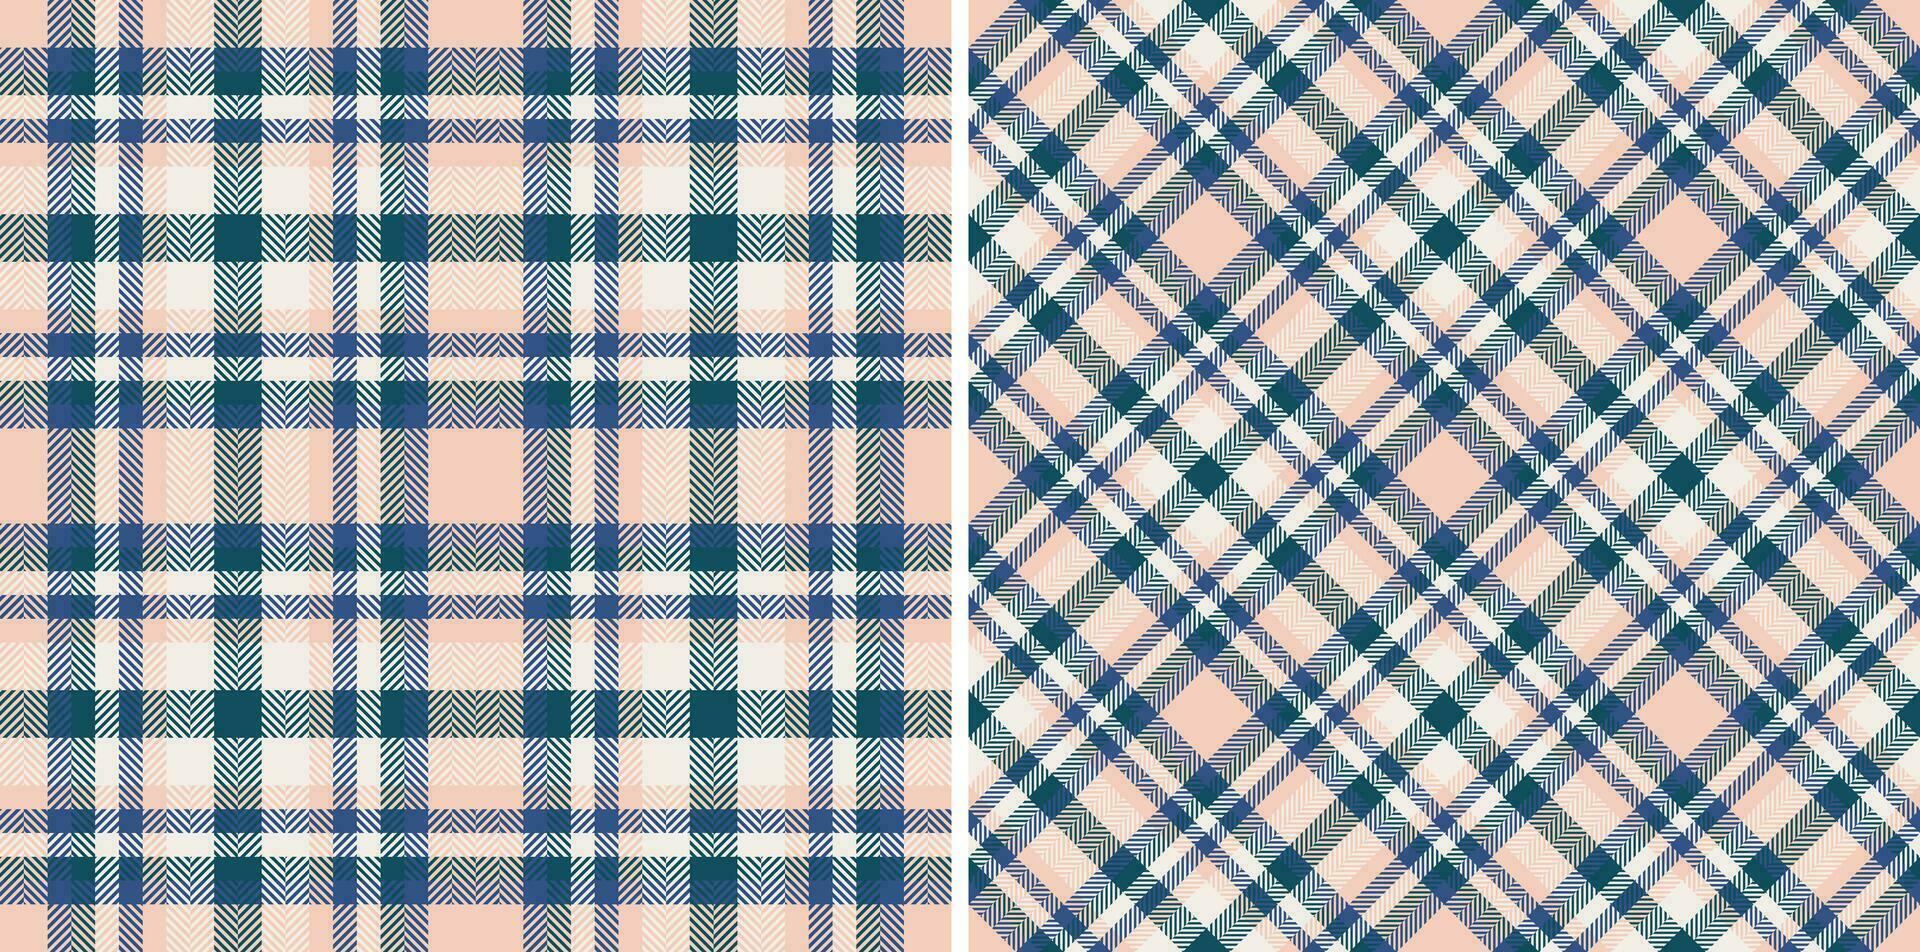 Background check pattern of tartan plaid vector with a fabric textile texture seamless.